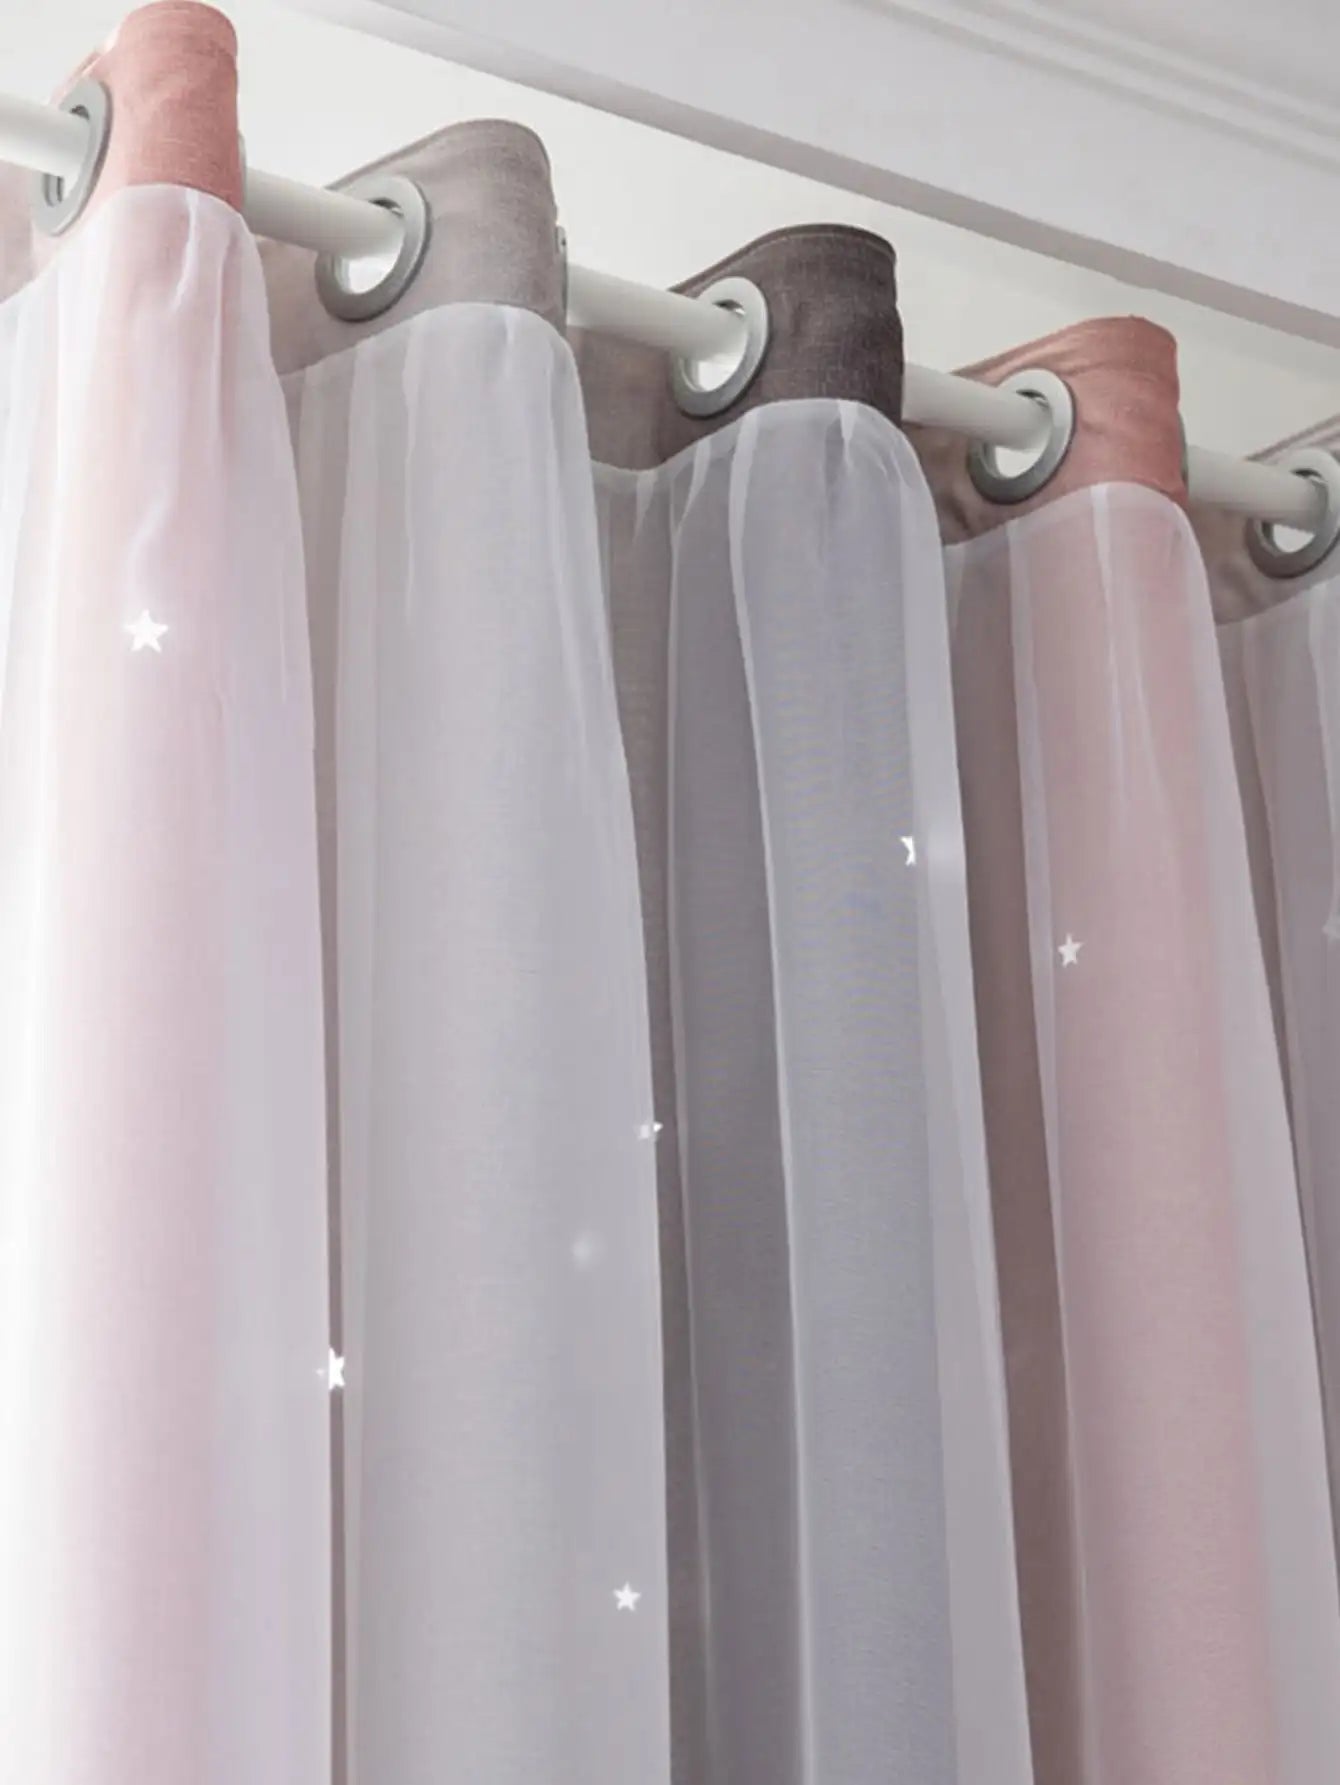 Steven Store™ Silver Twinkle Star Blackout Curtains: Elegant and functional for privacy and comfort